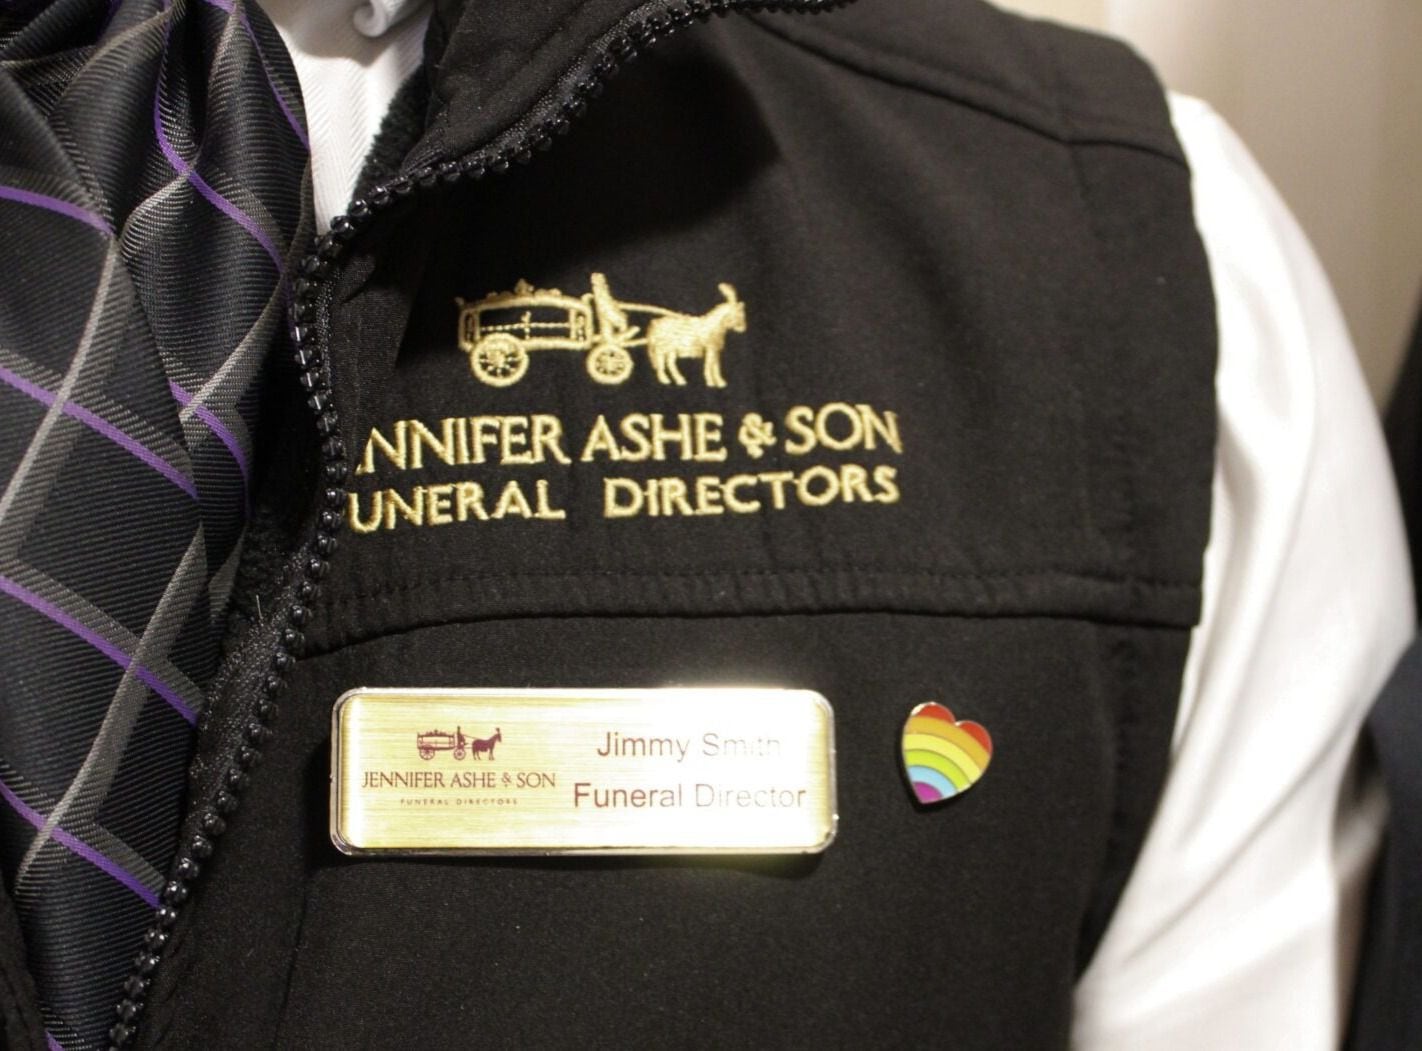 West Midlands funeral director sets standards for supporting LGBTQ+ community